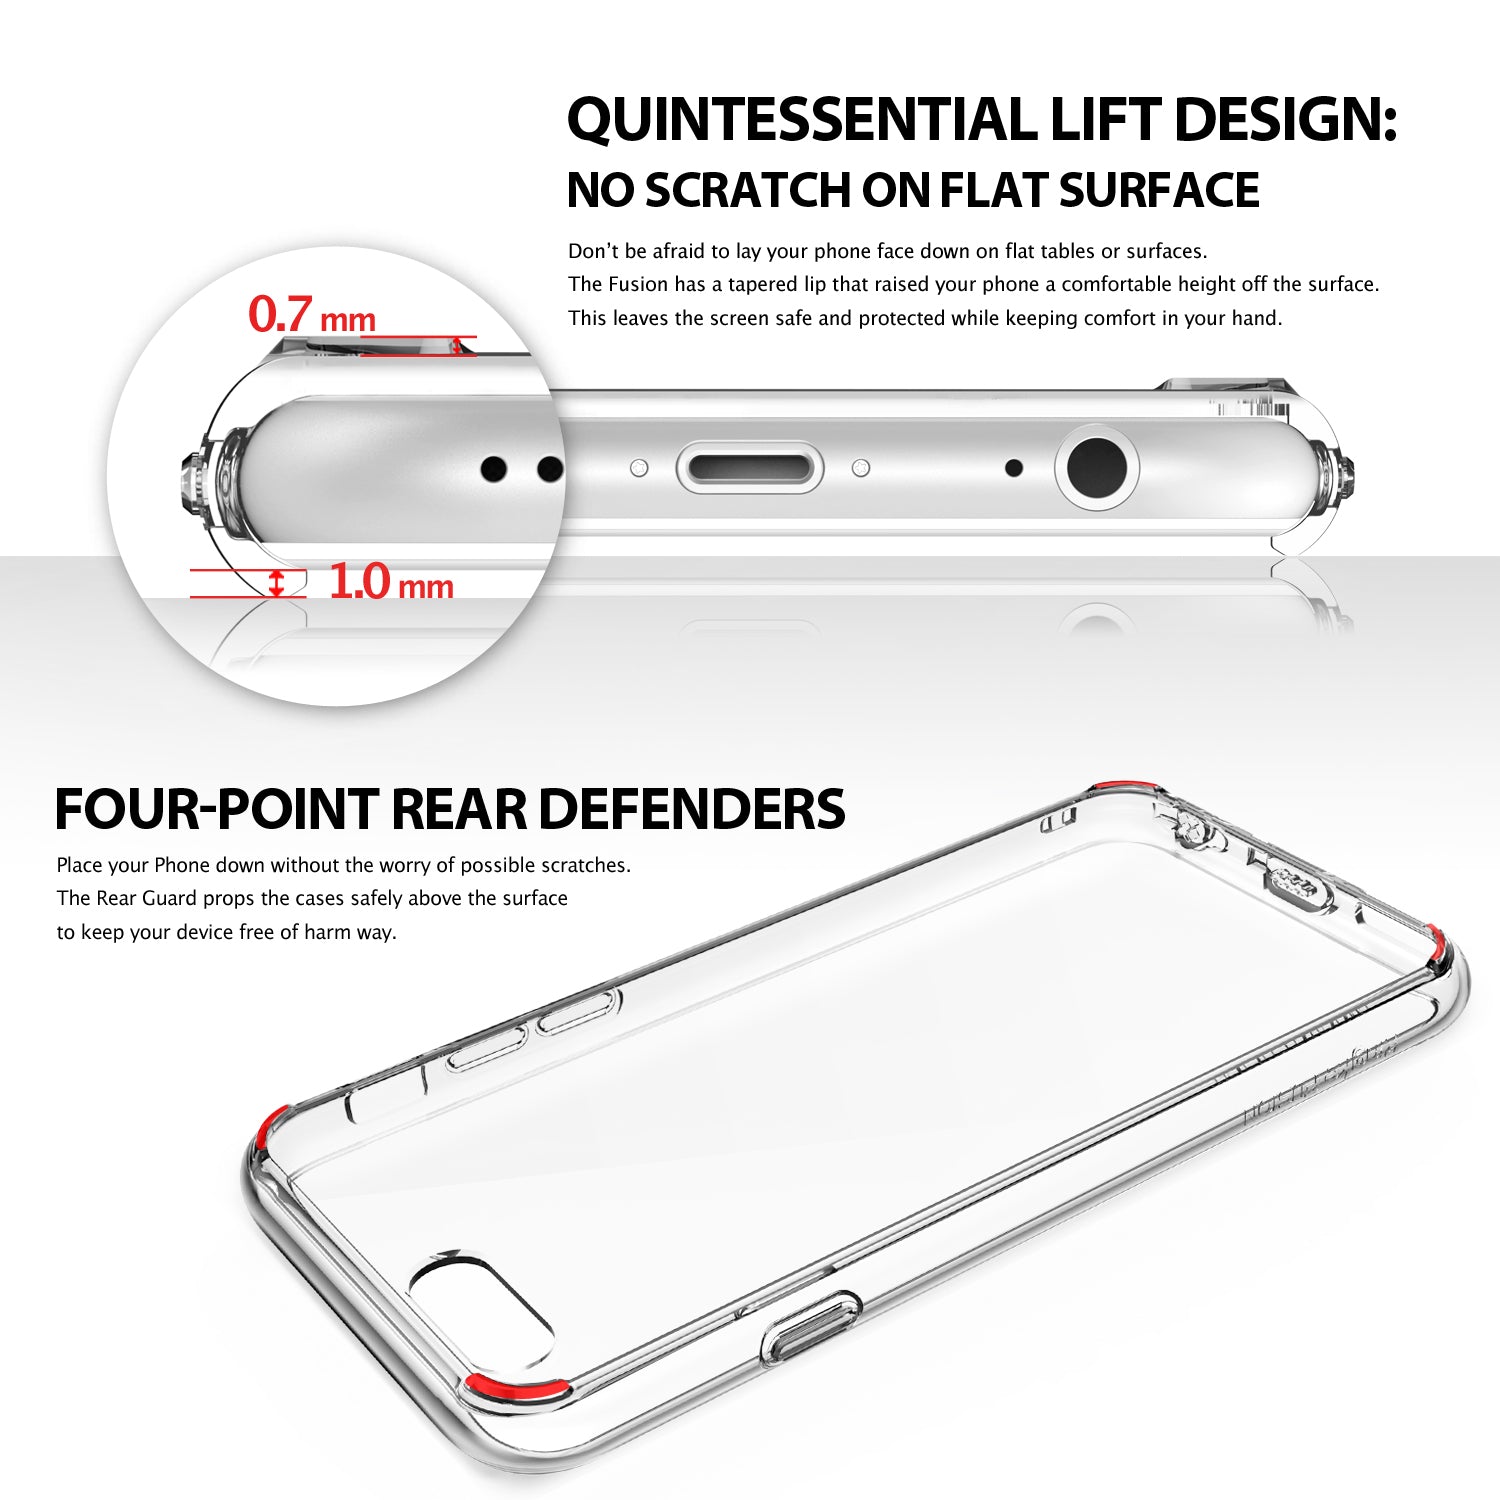 iPhone 6 Case | Fusion - Quintessential lift design. No scratch on flat surface. Four point rear defenders.